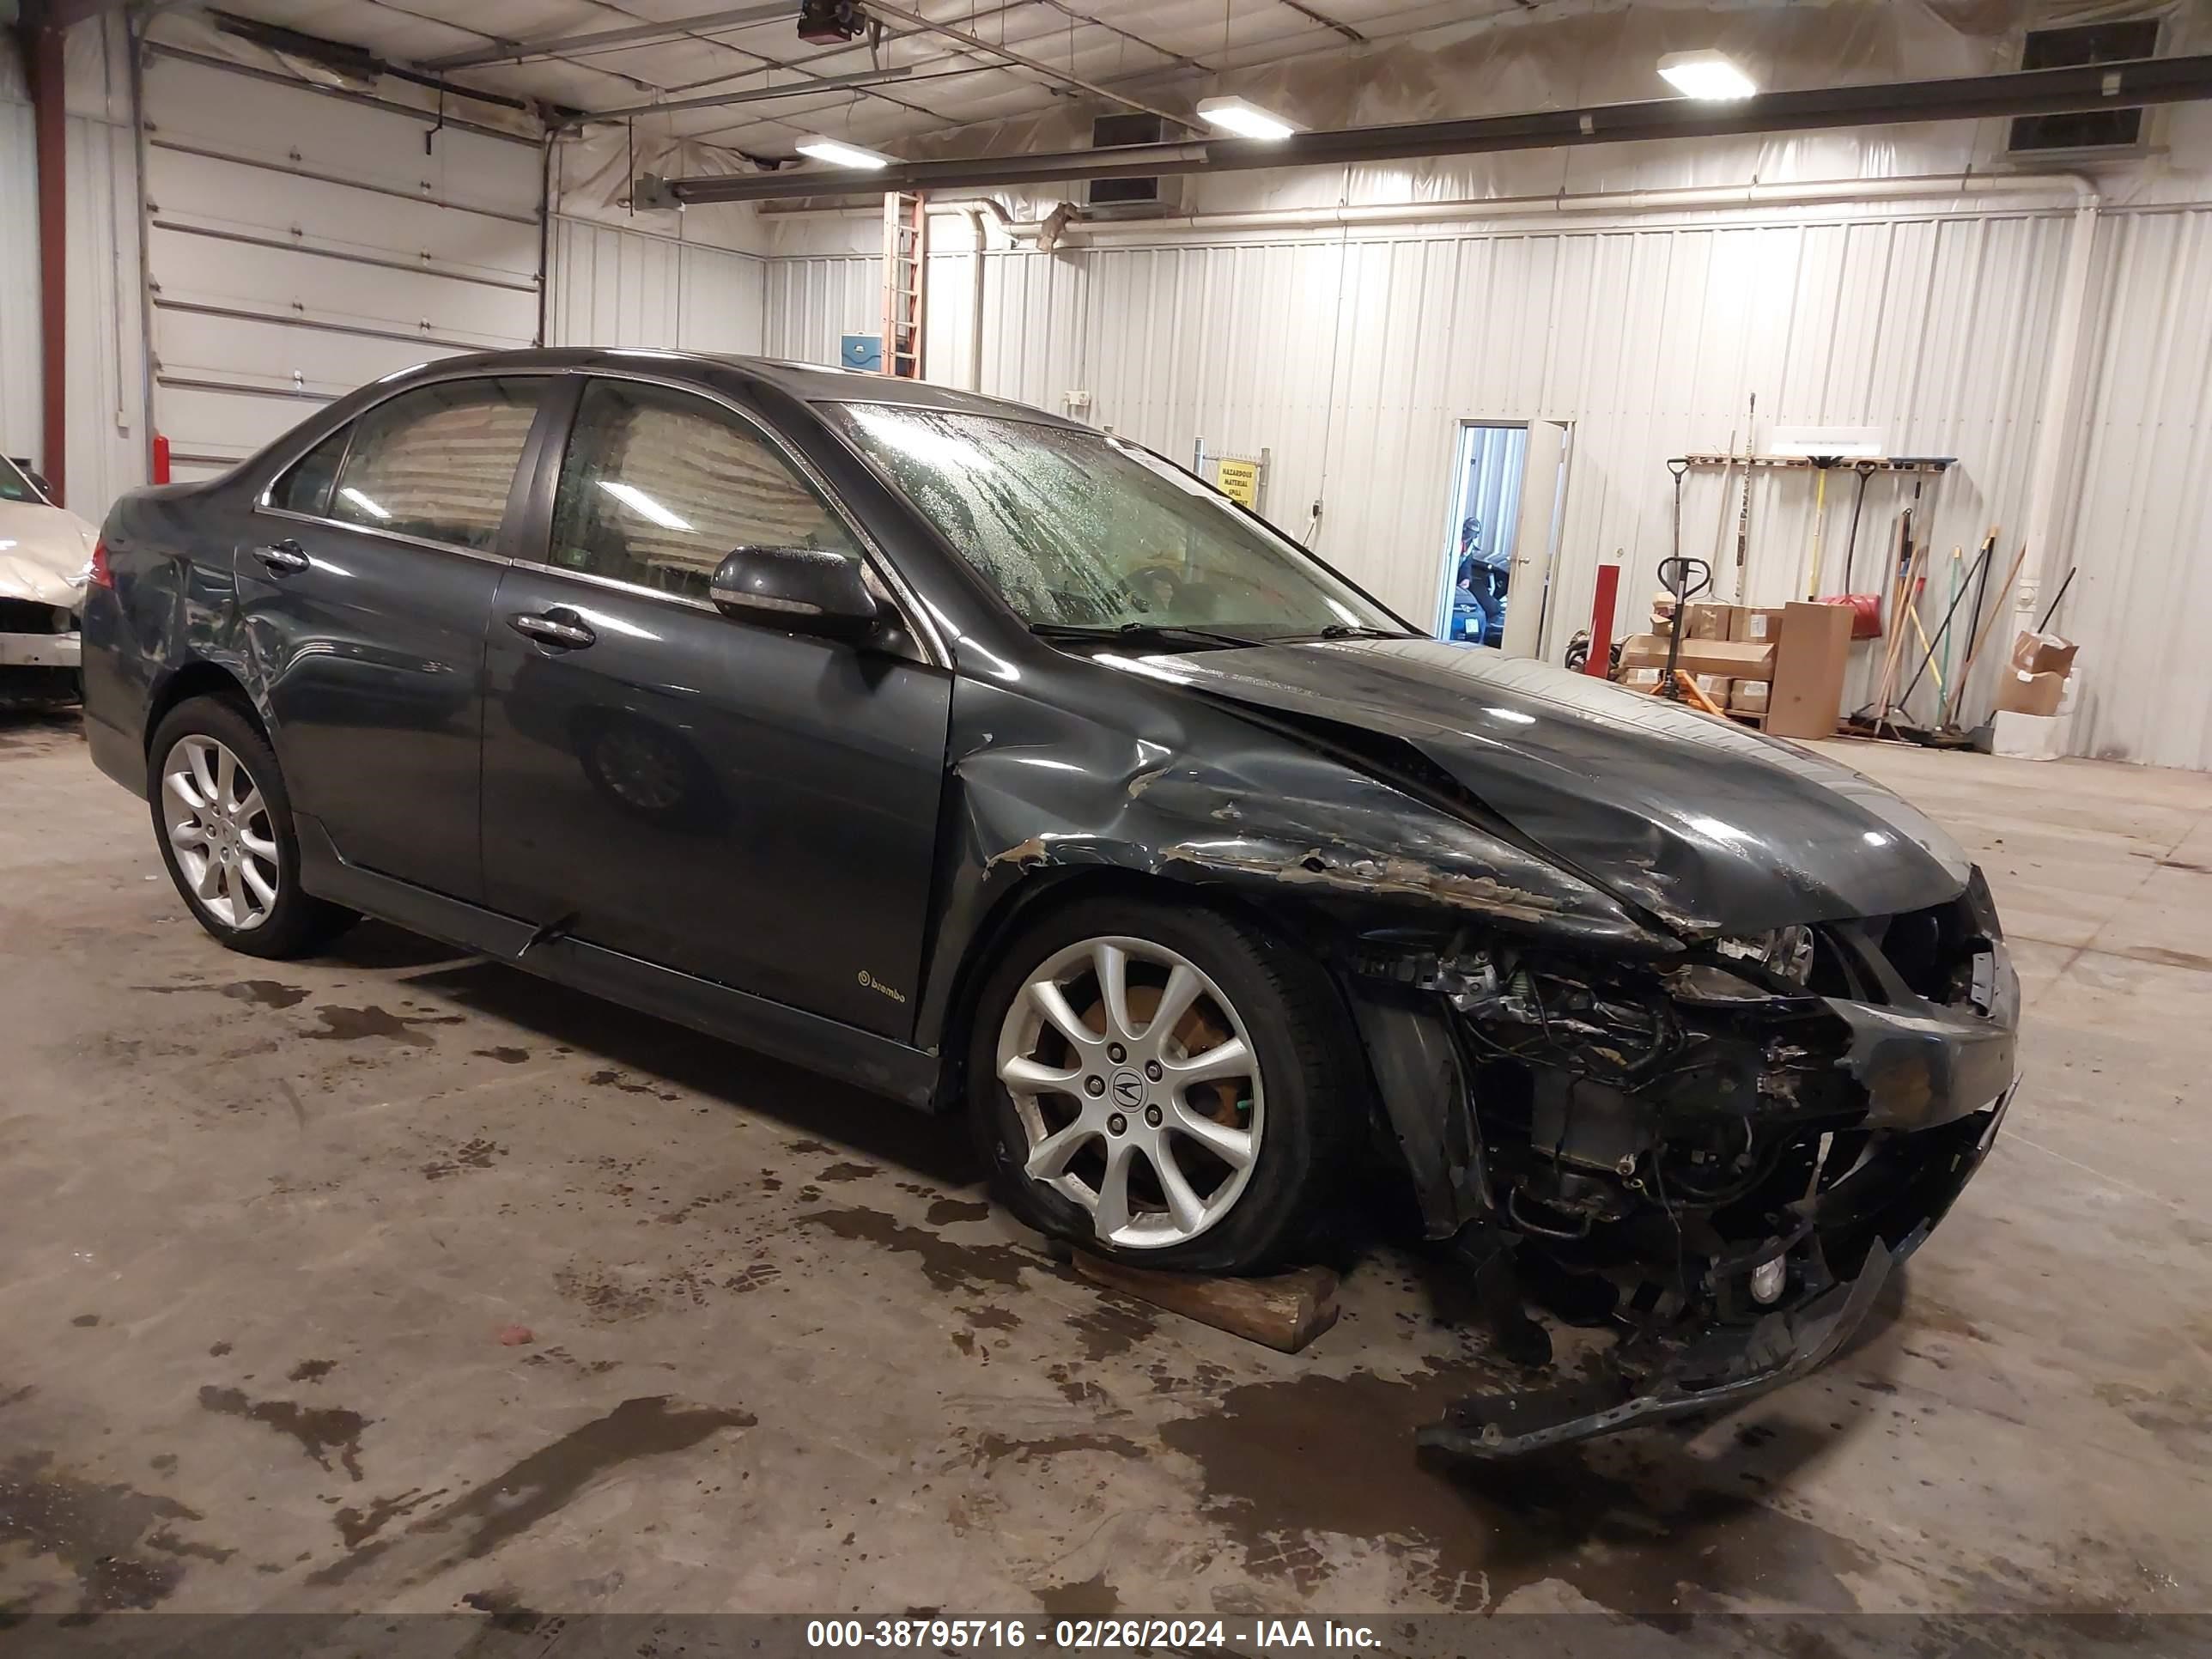 vin: JH4CL96958C001524 JH4CL96958C001524 2008 acura tsx 2400 for Sale in 50069, 1000 Armstrong Dr, De Soto, Iowa, USA